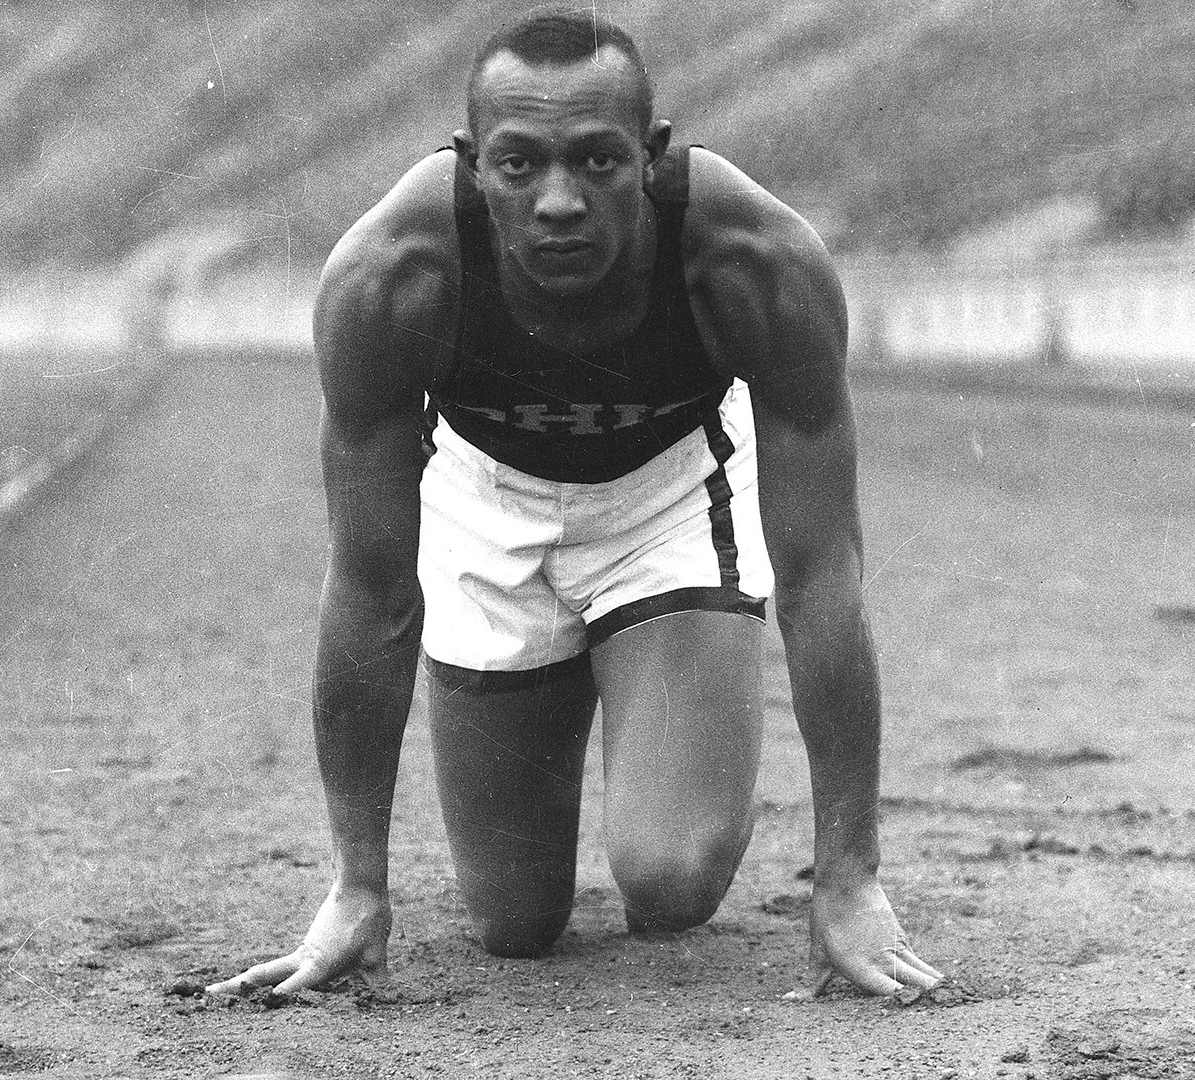 HE DID THE UNIMAGINABLE. In a space of 45 minutes, Jesse Owens of Ohio State set 6 World Records in 1935 at Michigan's Ferry Field. Join us tomorrow (Thursday 5/9) at 10am as we present the World Athletics Heritage Plaque to honor this legendary man and his Day of Days.